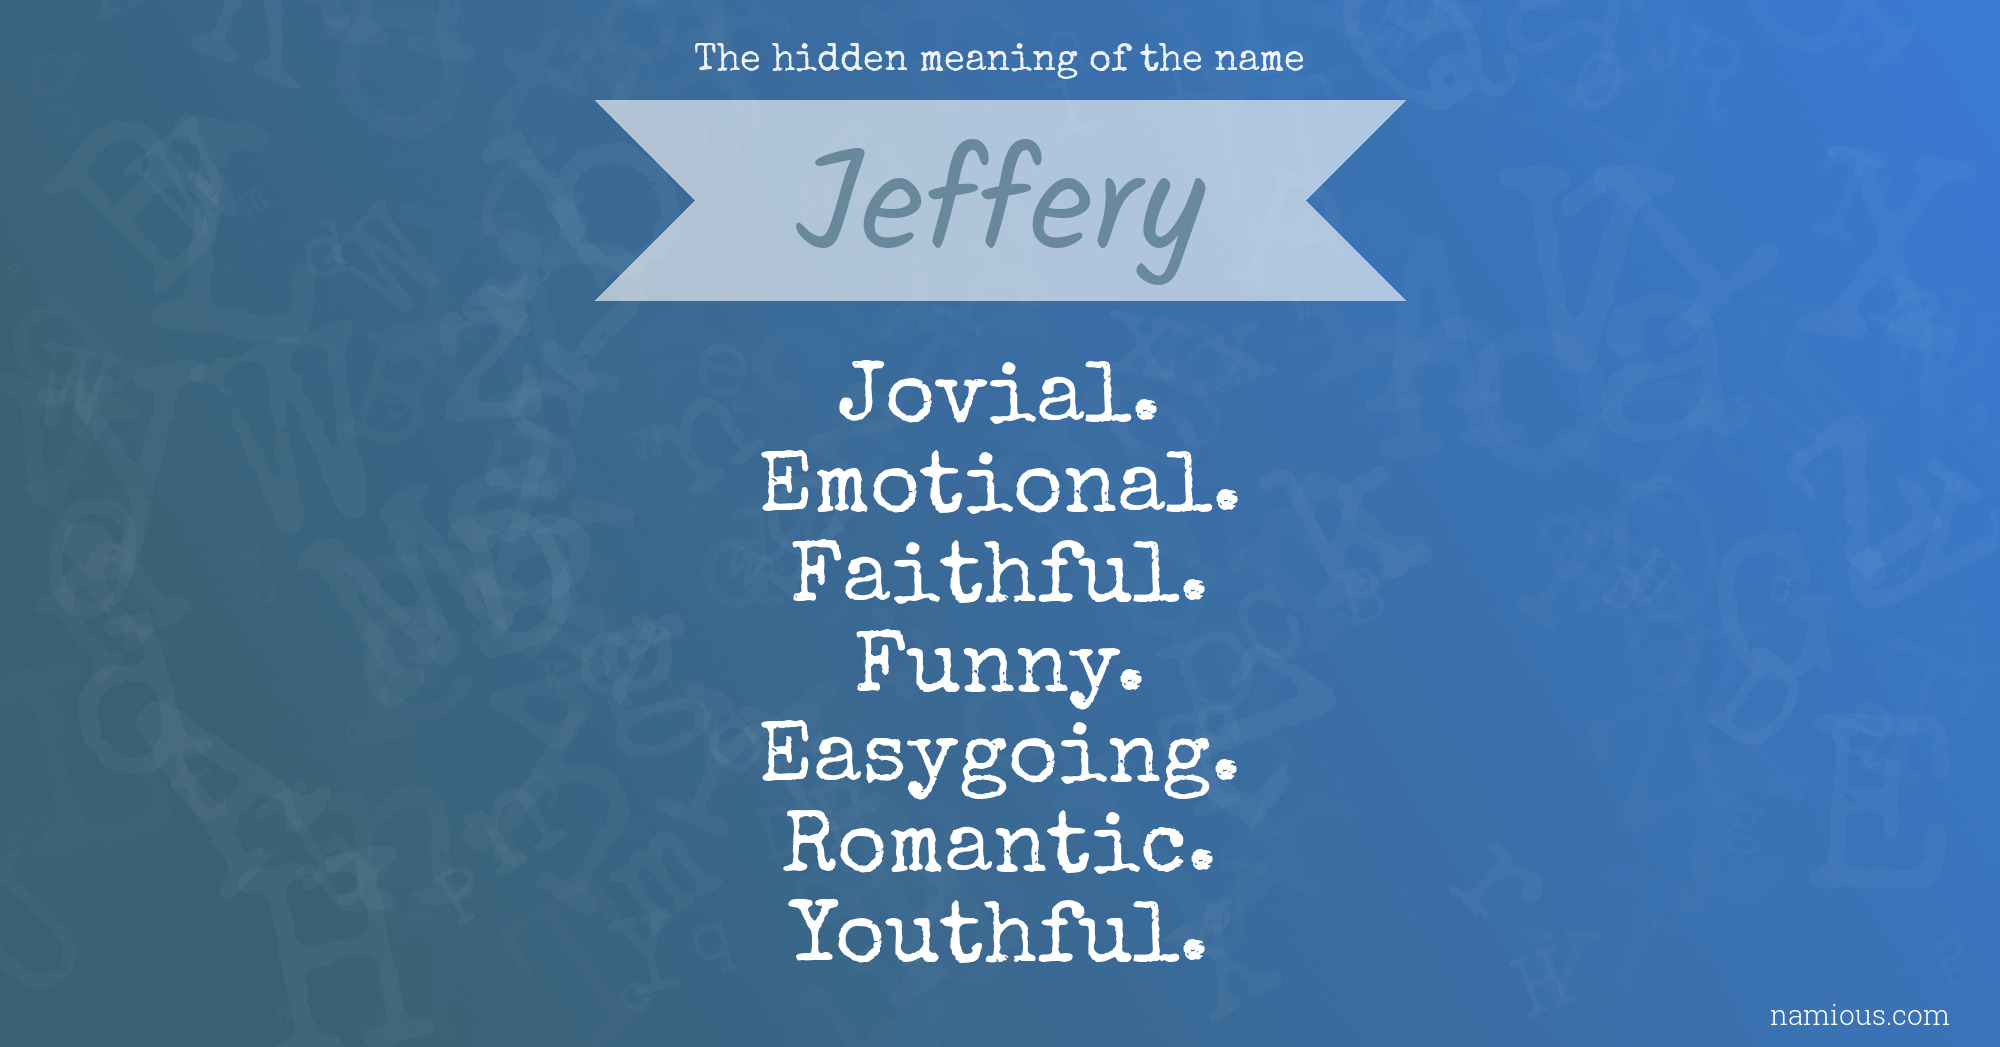 The hidden meaning of the name Jeffery